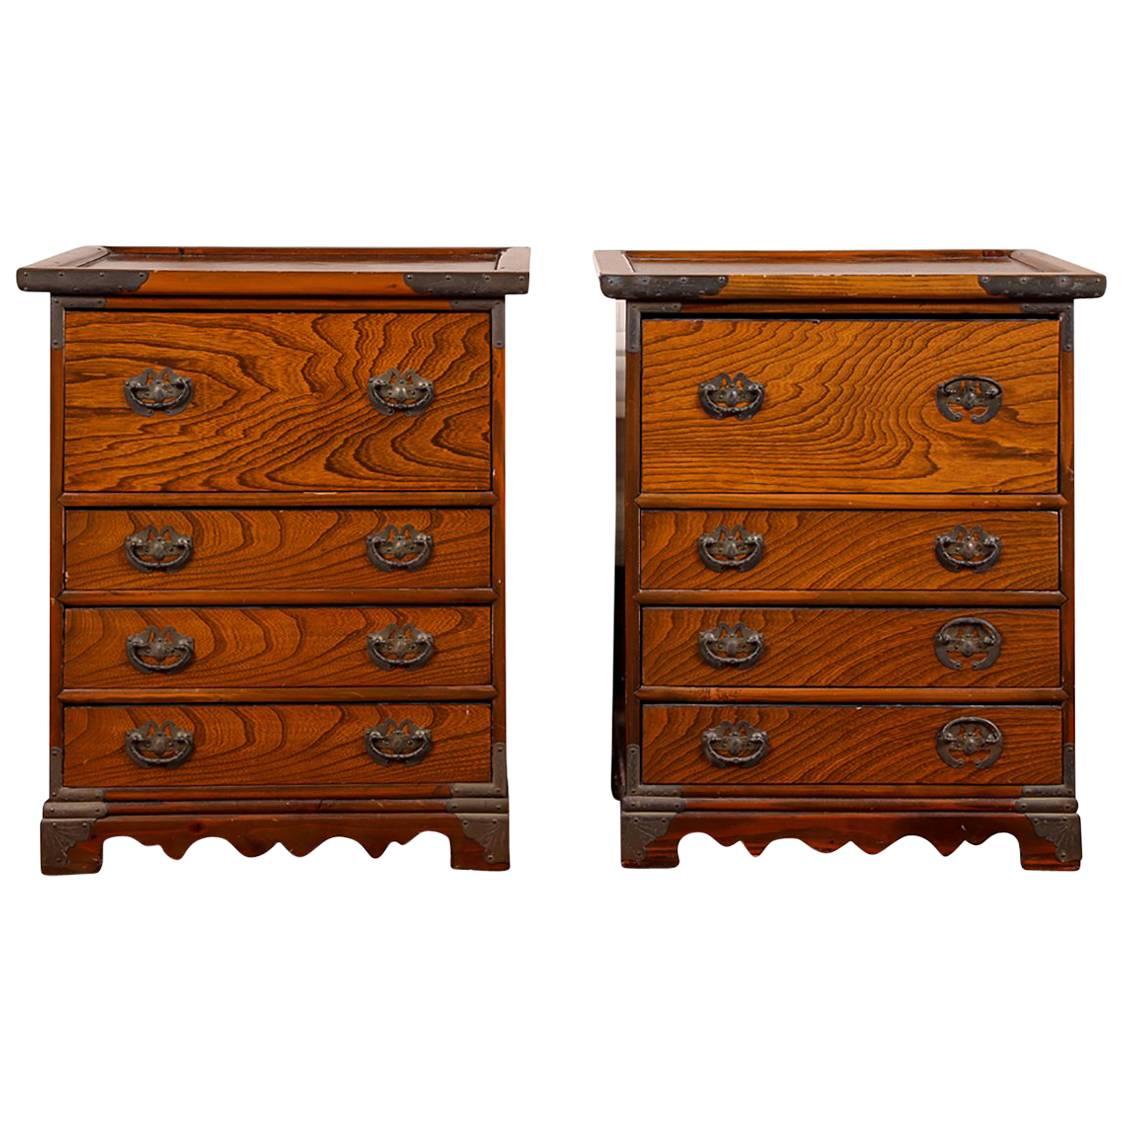 Pair of Oriental Exotic Wood Bedside Chests